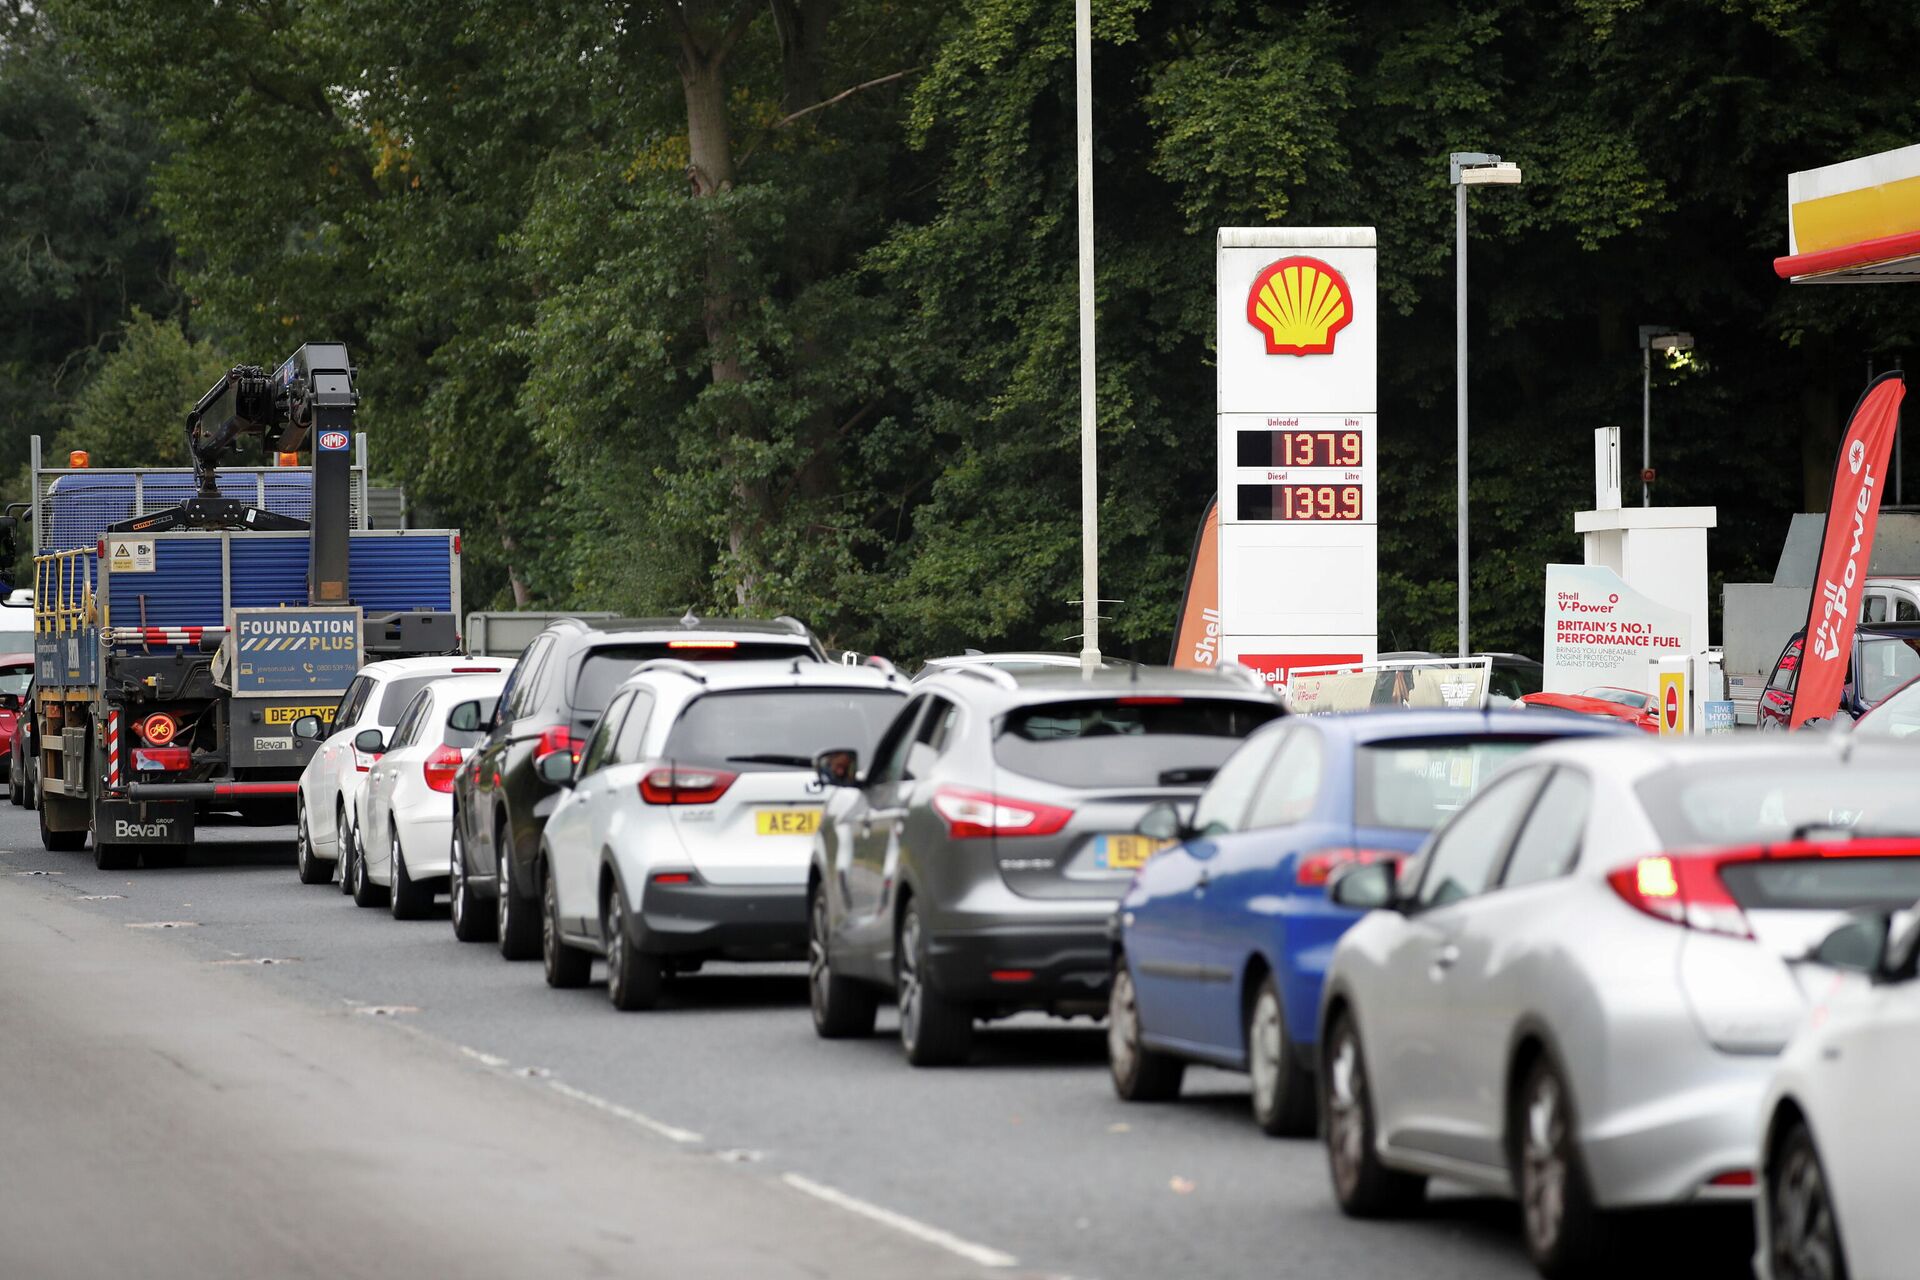 Vehicles queue to refill outside a Shell fuel station in Redbourn, Britain, September 25, 2021. REUTERS/Peter Cziborra - Sputnik International, 1920, 13.10.2021